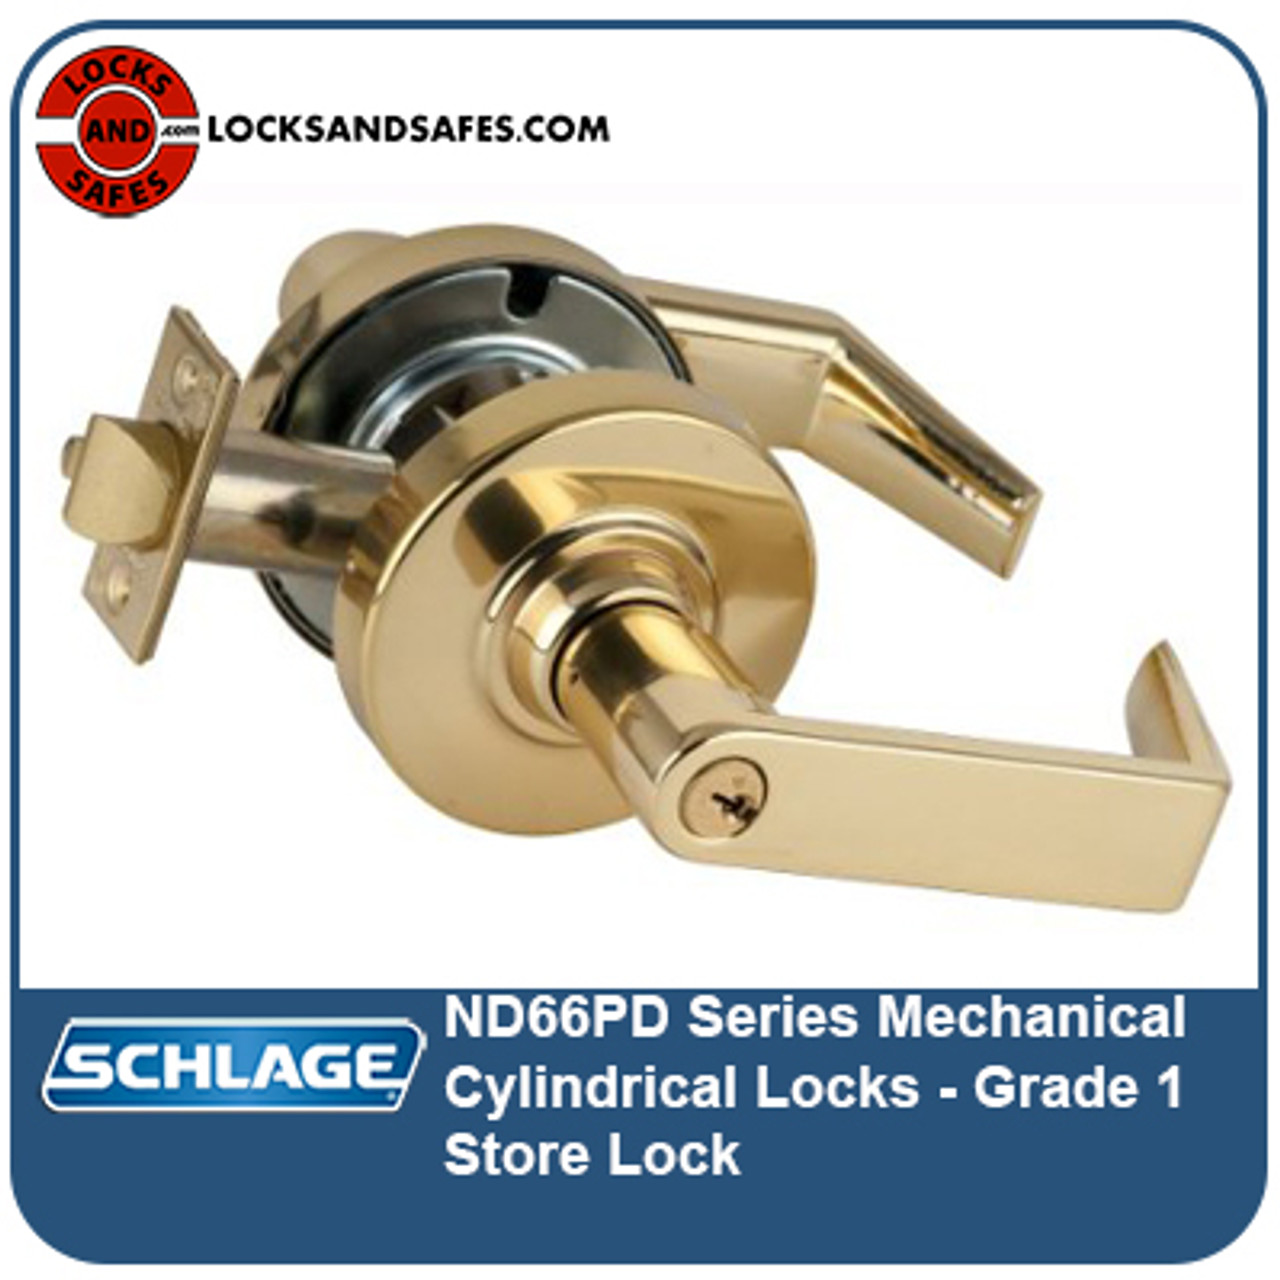 Schlage ND66PD Cylindrical Lock Locks for Stores Storerooms